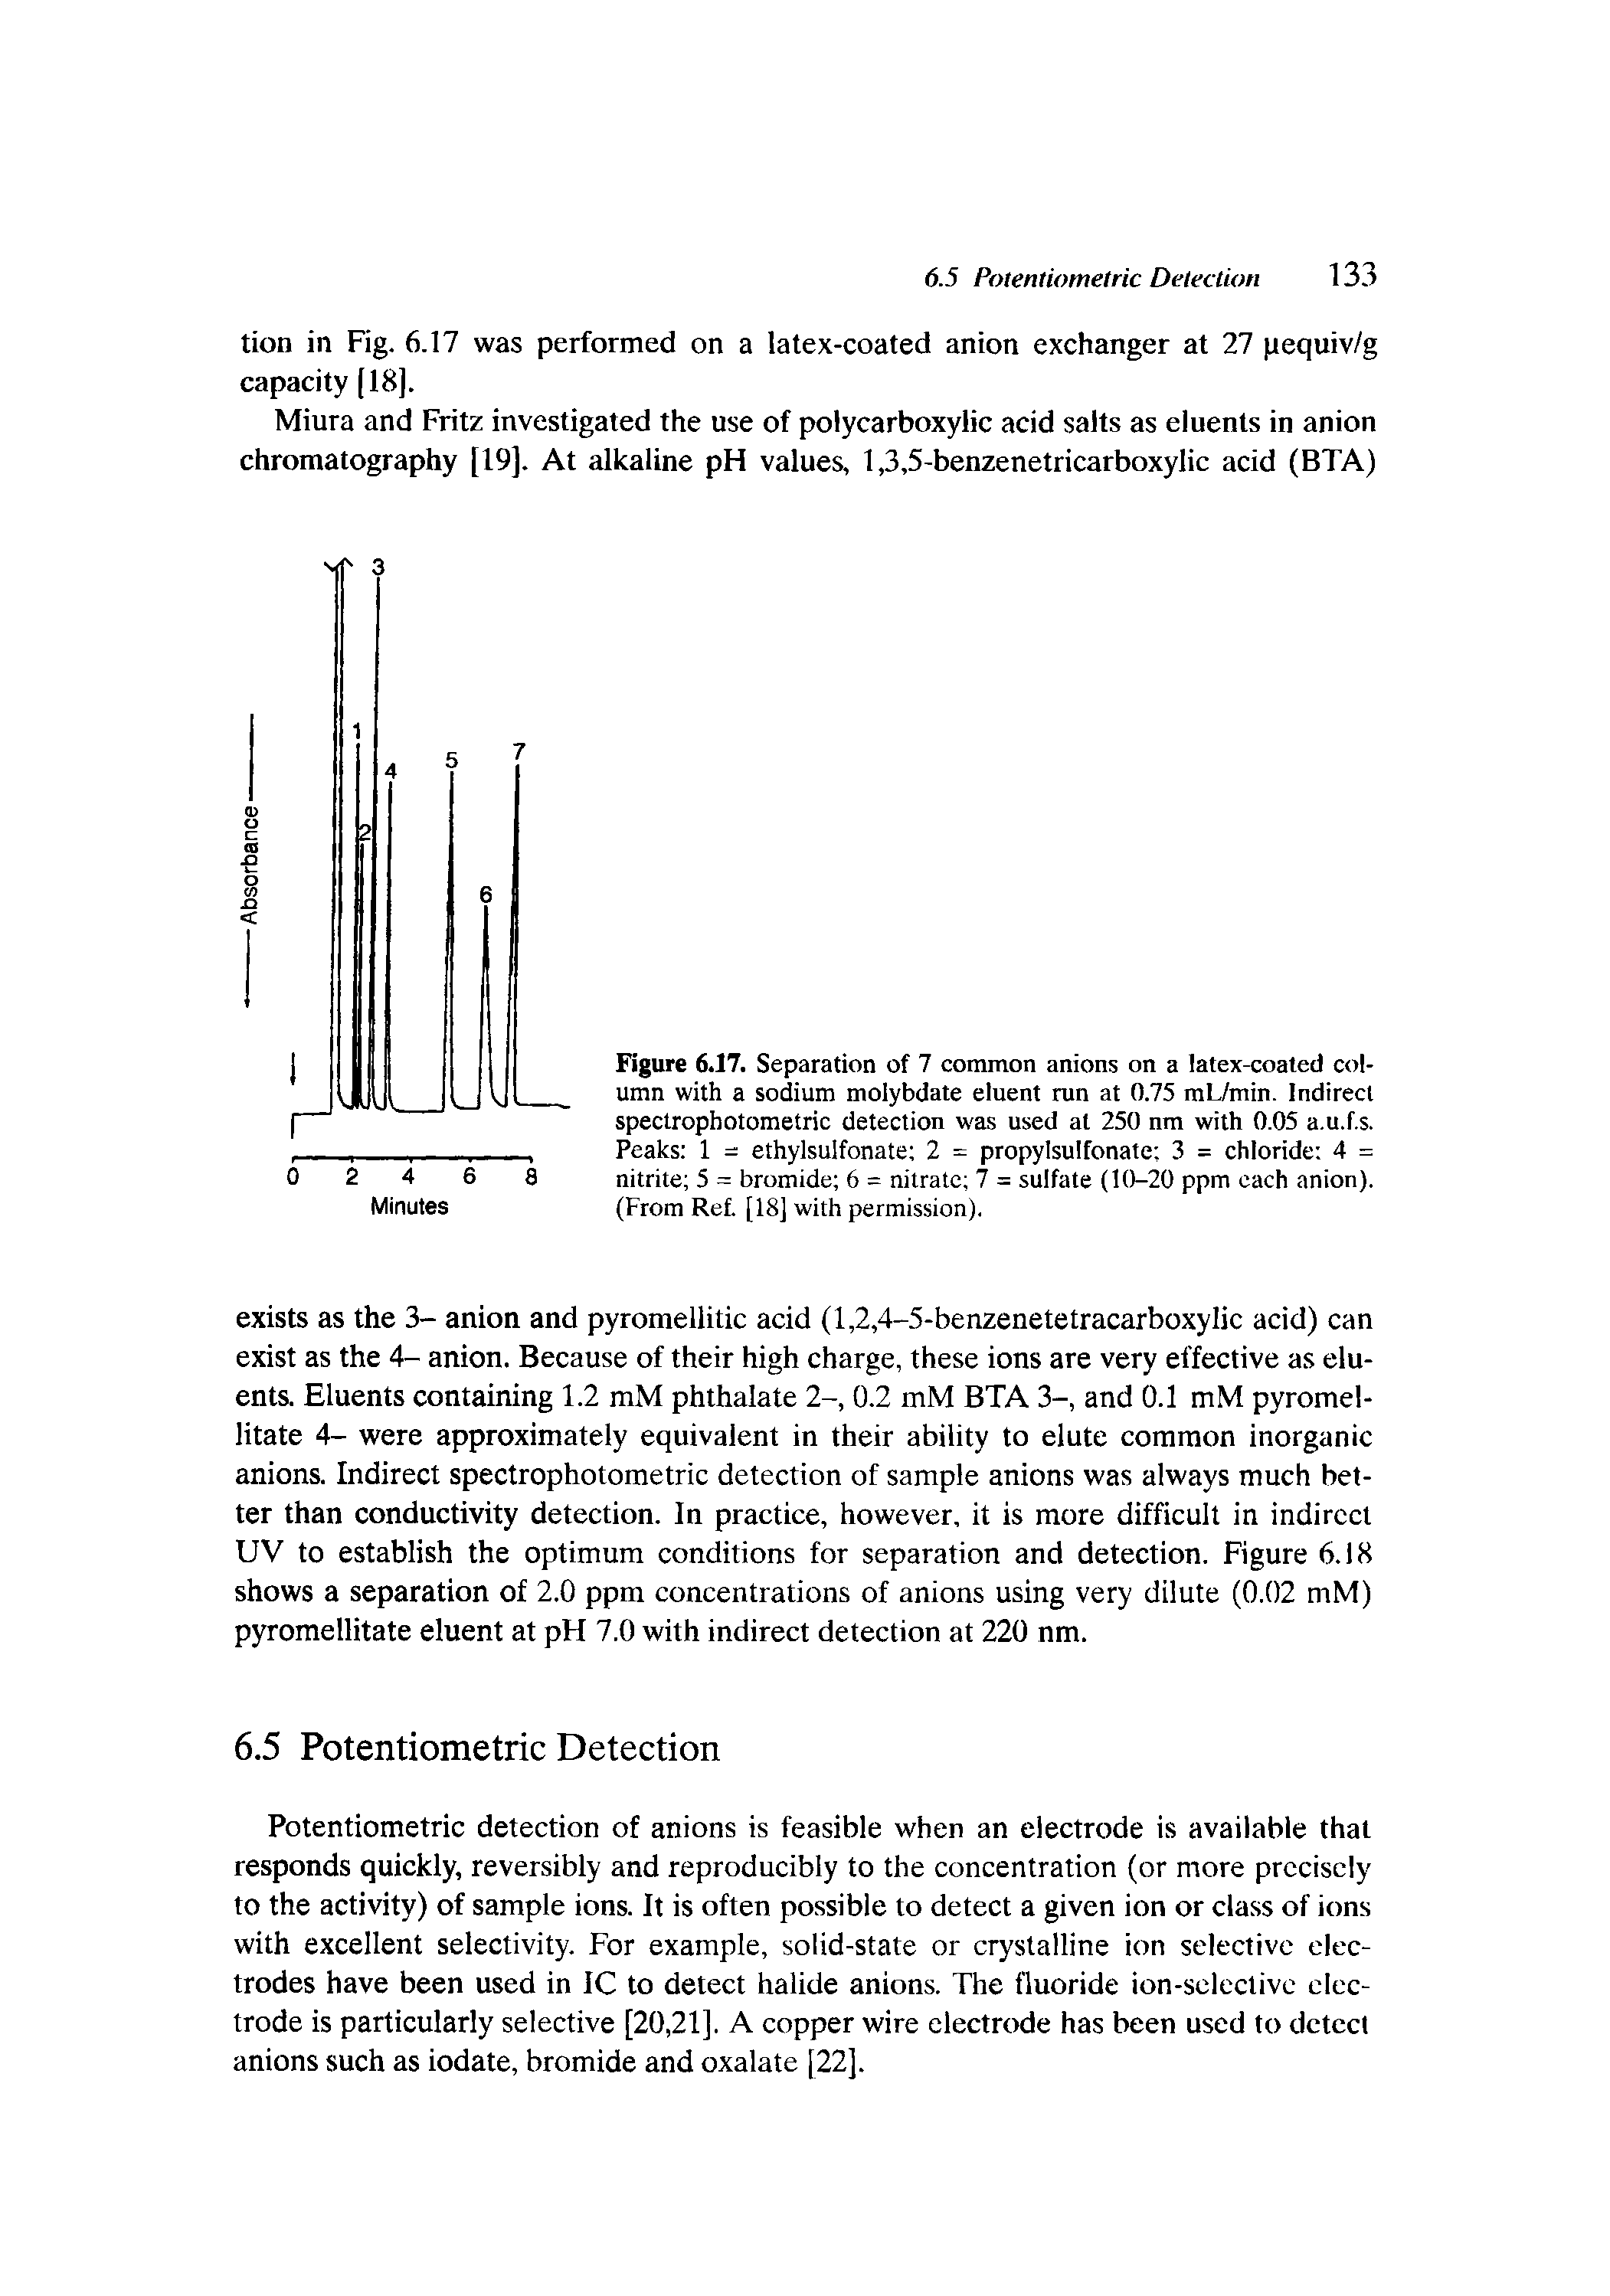 Figure 6.17. Separation of 7 common anions on a latex-coated column with a sodium molybdate eluent run at 0.75 mL/min. Indirect spectropbotometric detection was used at 250 nm with 0.05 a.u.f.s. Peaks 1 = ethylsulfonate 2 = propylsulfonate 3 = chloride 4 = nitrite 5 = bromide 6 = nitrate 7 = sulfate (10-20 ppm each anion). (From Ref. [18] with permission).